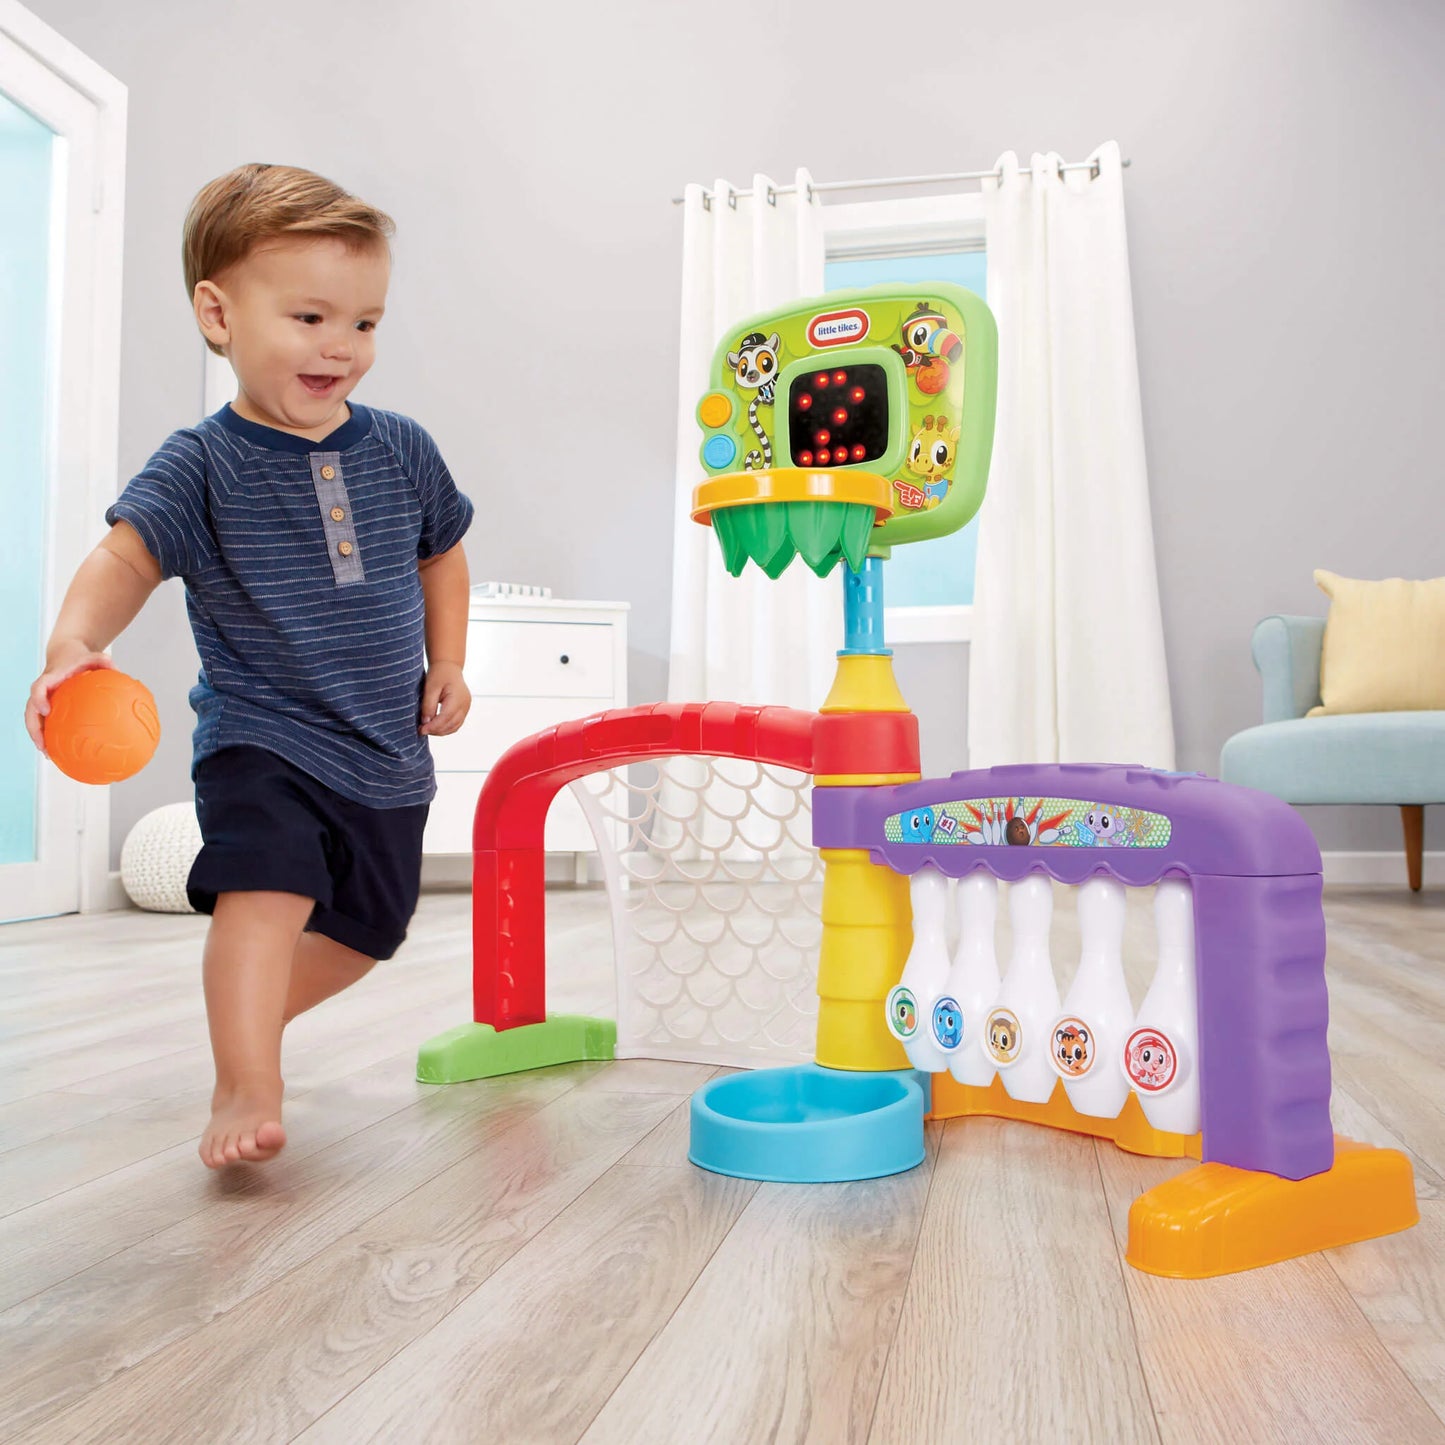 New Little Tikes 3-in-1 Sports Zone